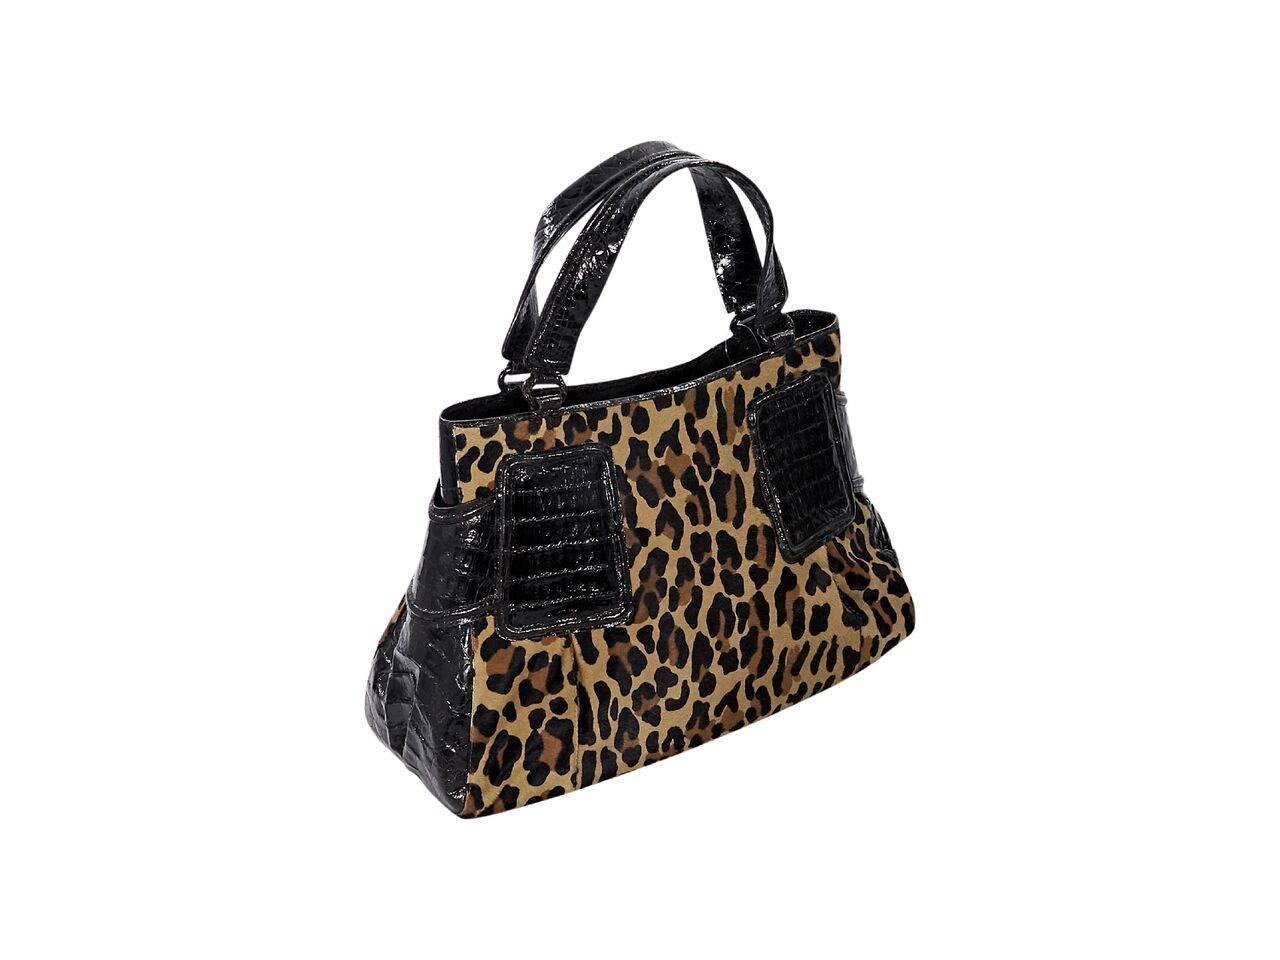 Product details:  Multicolor leopard-print pony hair tote bag by Nancy Gonzalez.  Trimmed with crocodile skin.  Dual shoulder straps.  Concealed magnetic tab closure.  Lined interior with inner zip and slide pockets.  Protective metal feet. 